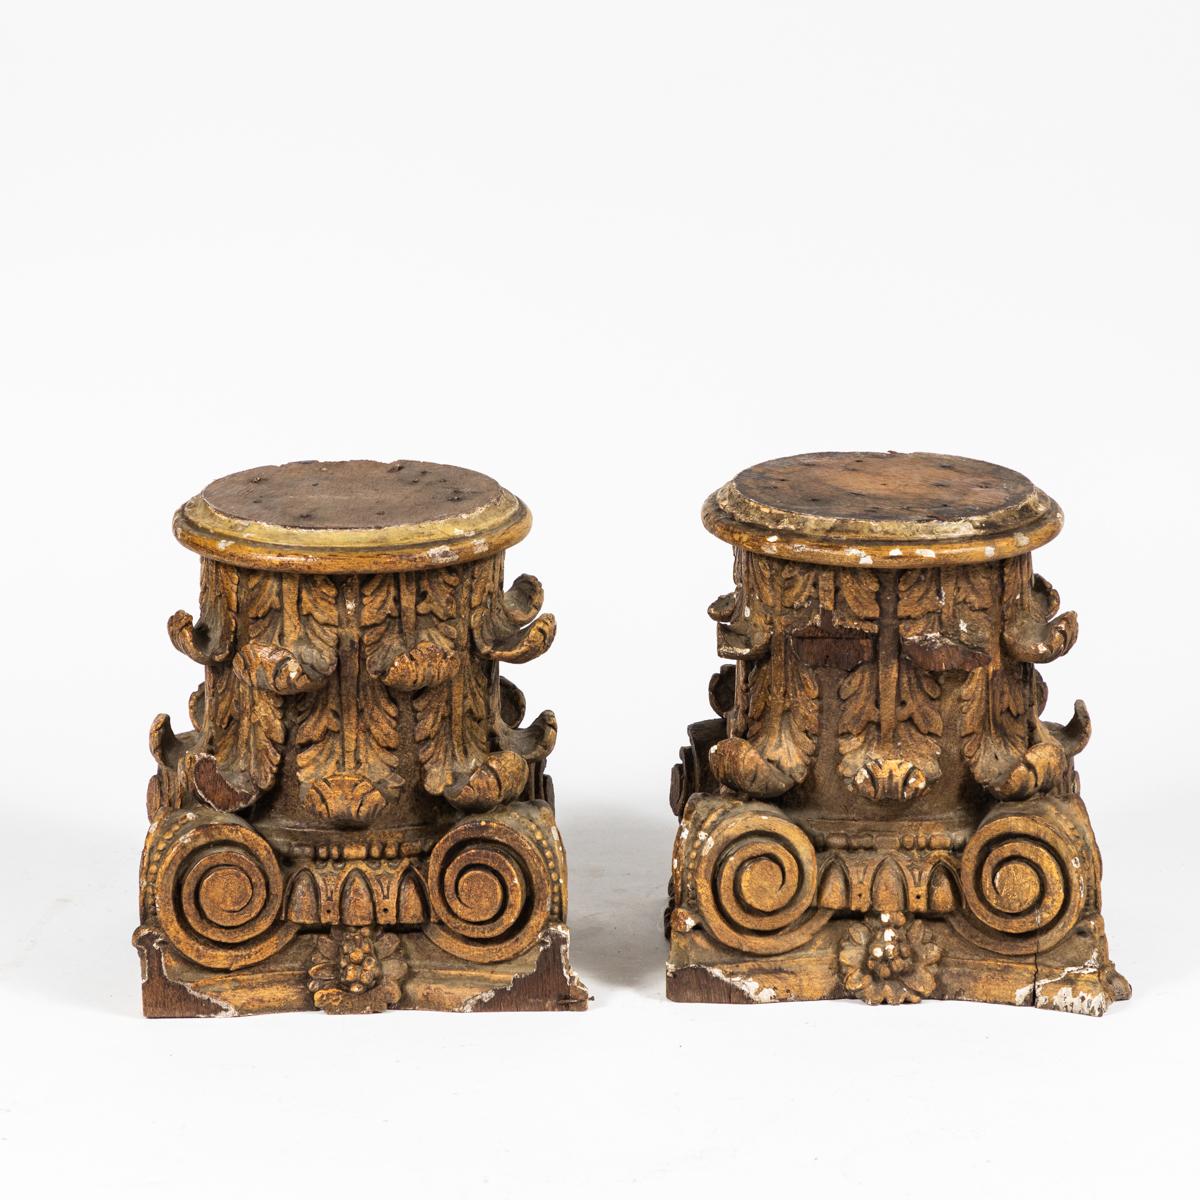 Pair of 19th-century wooden composite-style column capitals from France. These column capitals in the composite style would be great as a desk or bookcase accessory or on a mantlepiece. The gently worn finish juxtaposed with the classically formal